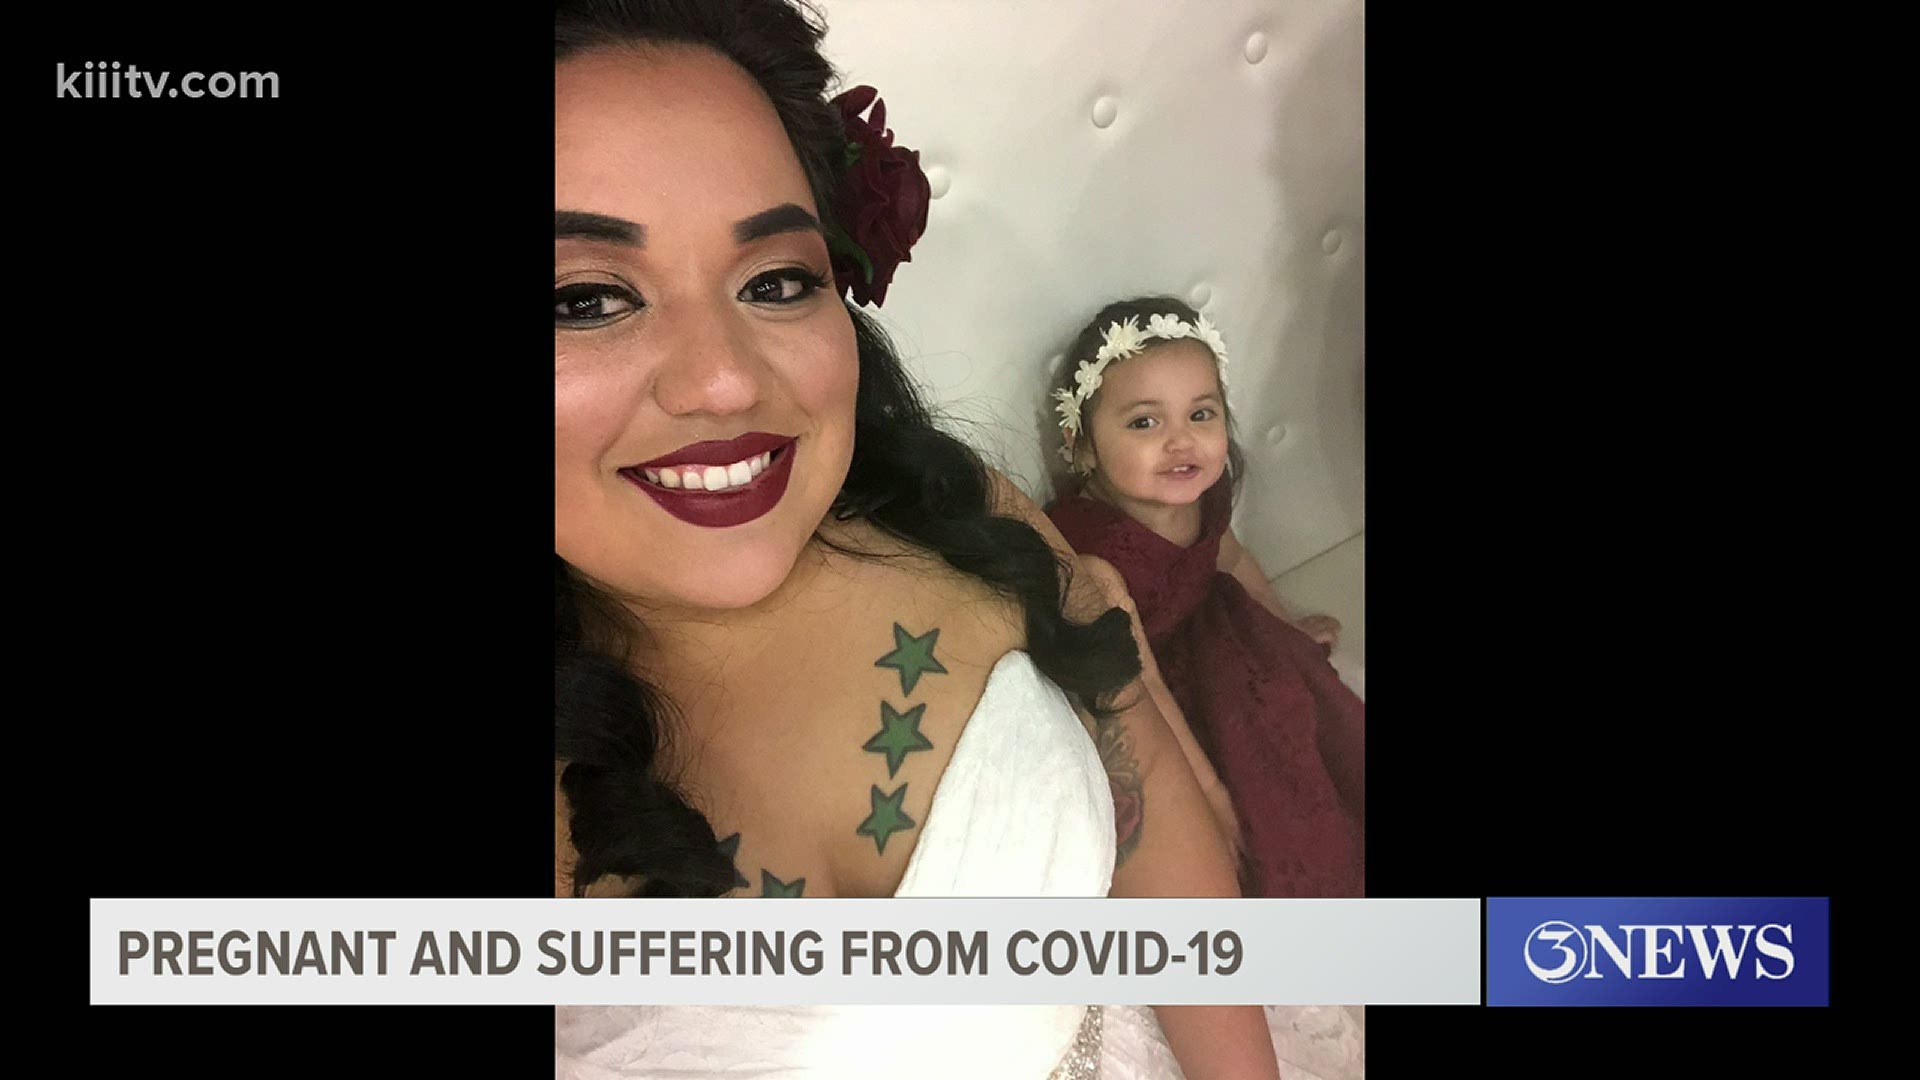 Sarah Gutierrez shares her experience battling COVID-19 while pregnant.